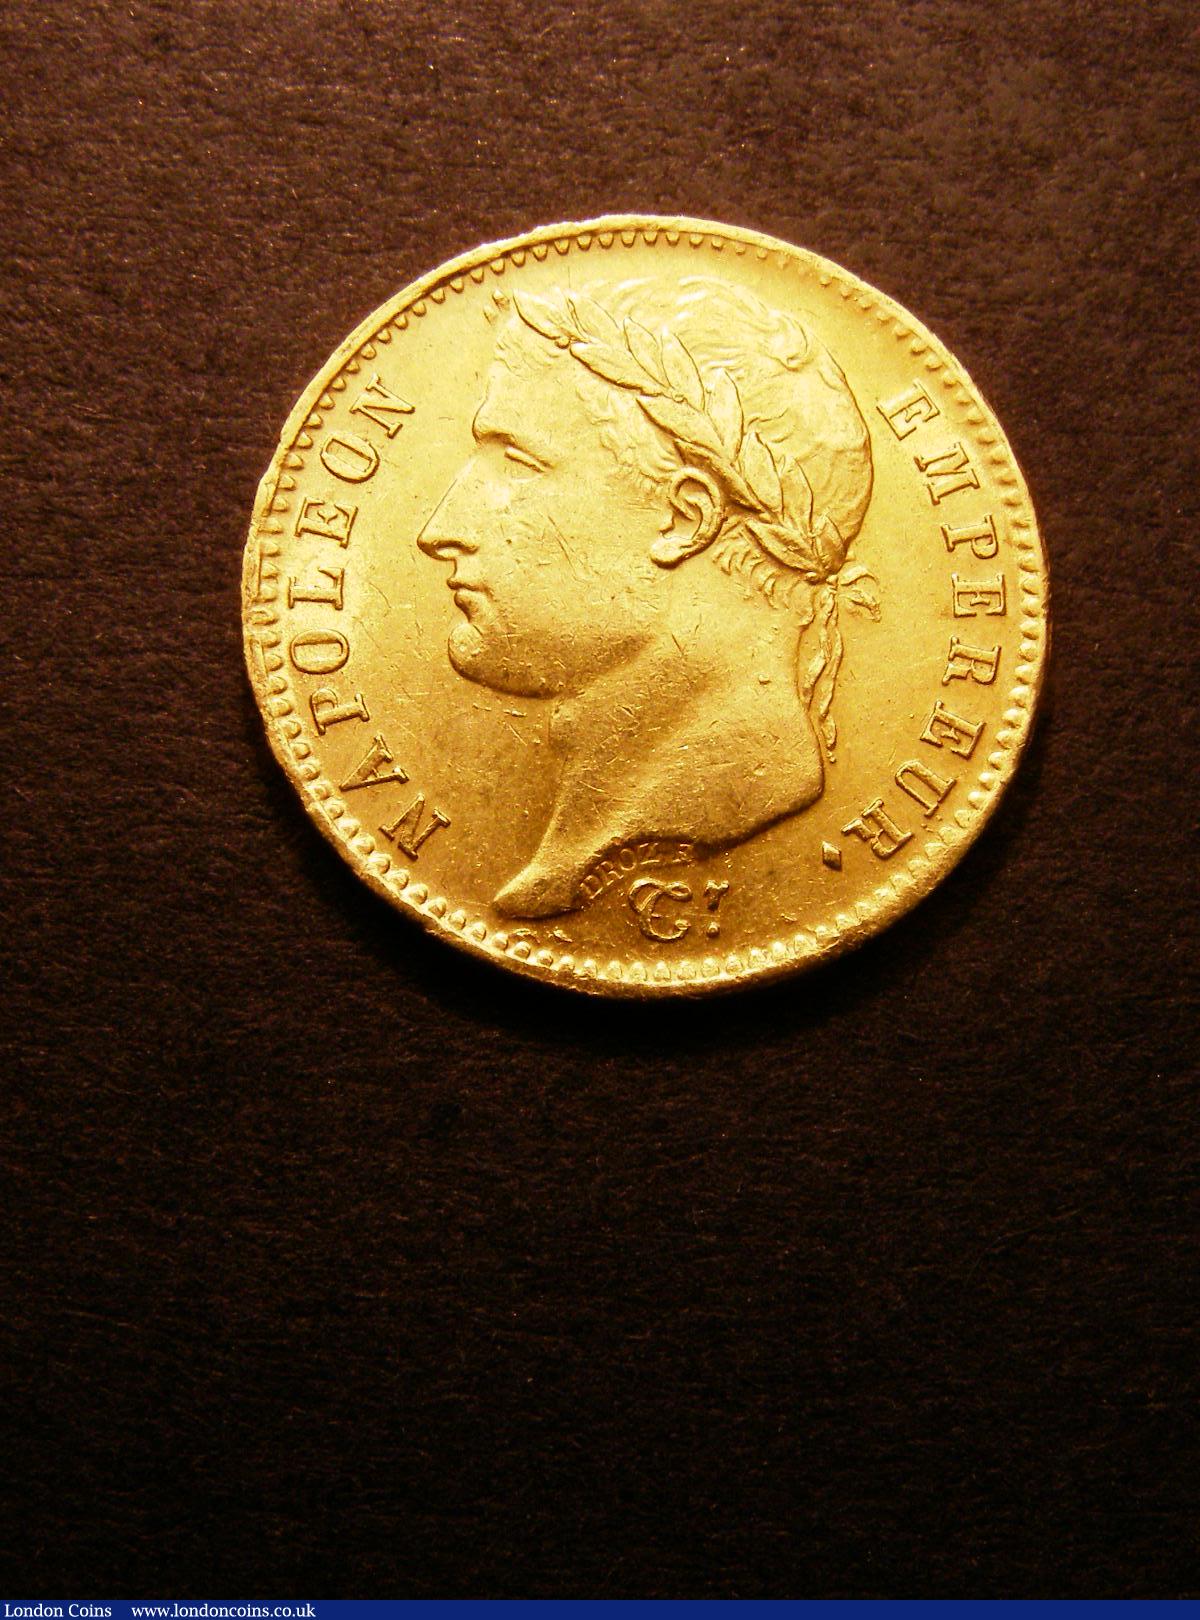 France 20 Francs Gold 1810A Le Franc 516/8 VF/GVF with some contact marks : World Coins : Auction 133 : Lot 1303